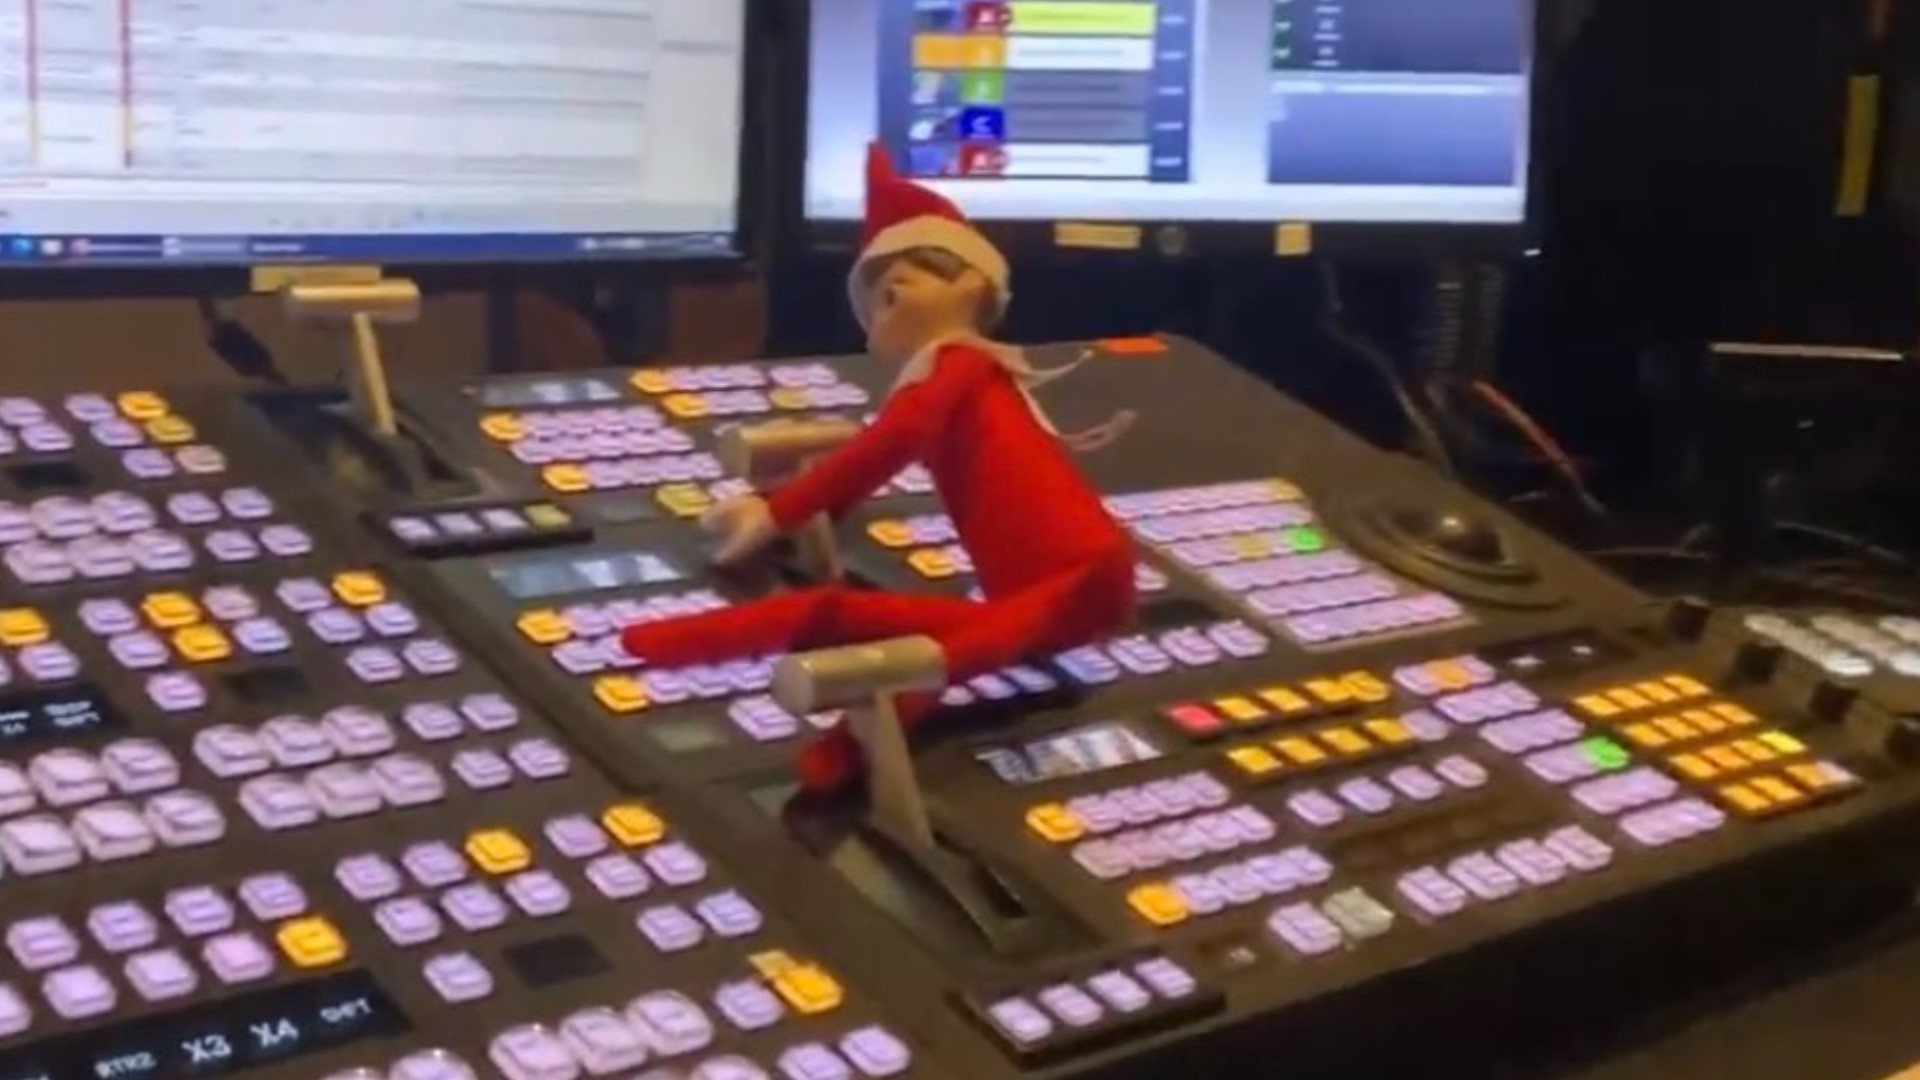 The Elf on the Shelf is visiting Up with Krem. Show us where your Elf is hiding. Text 509-448-200.